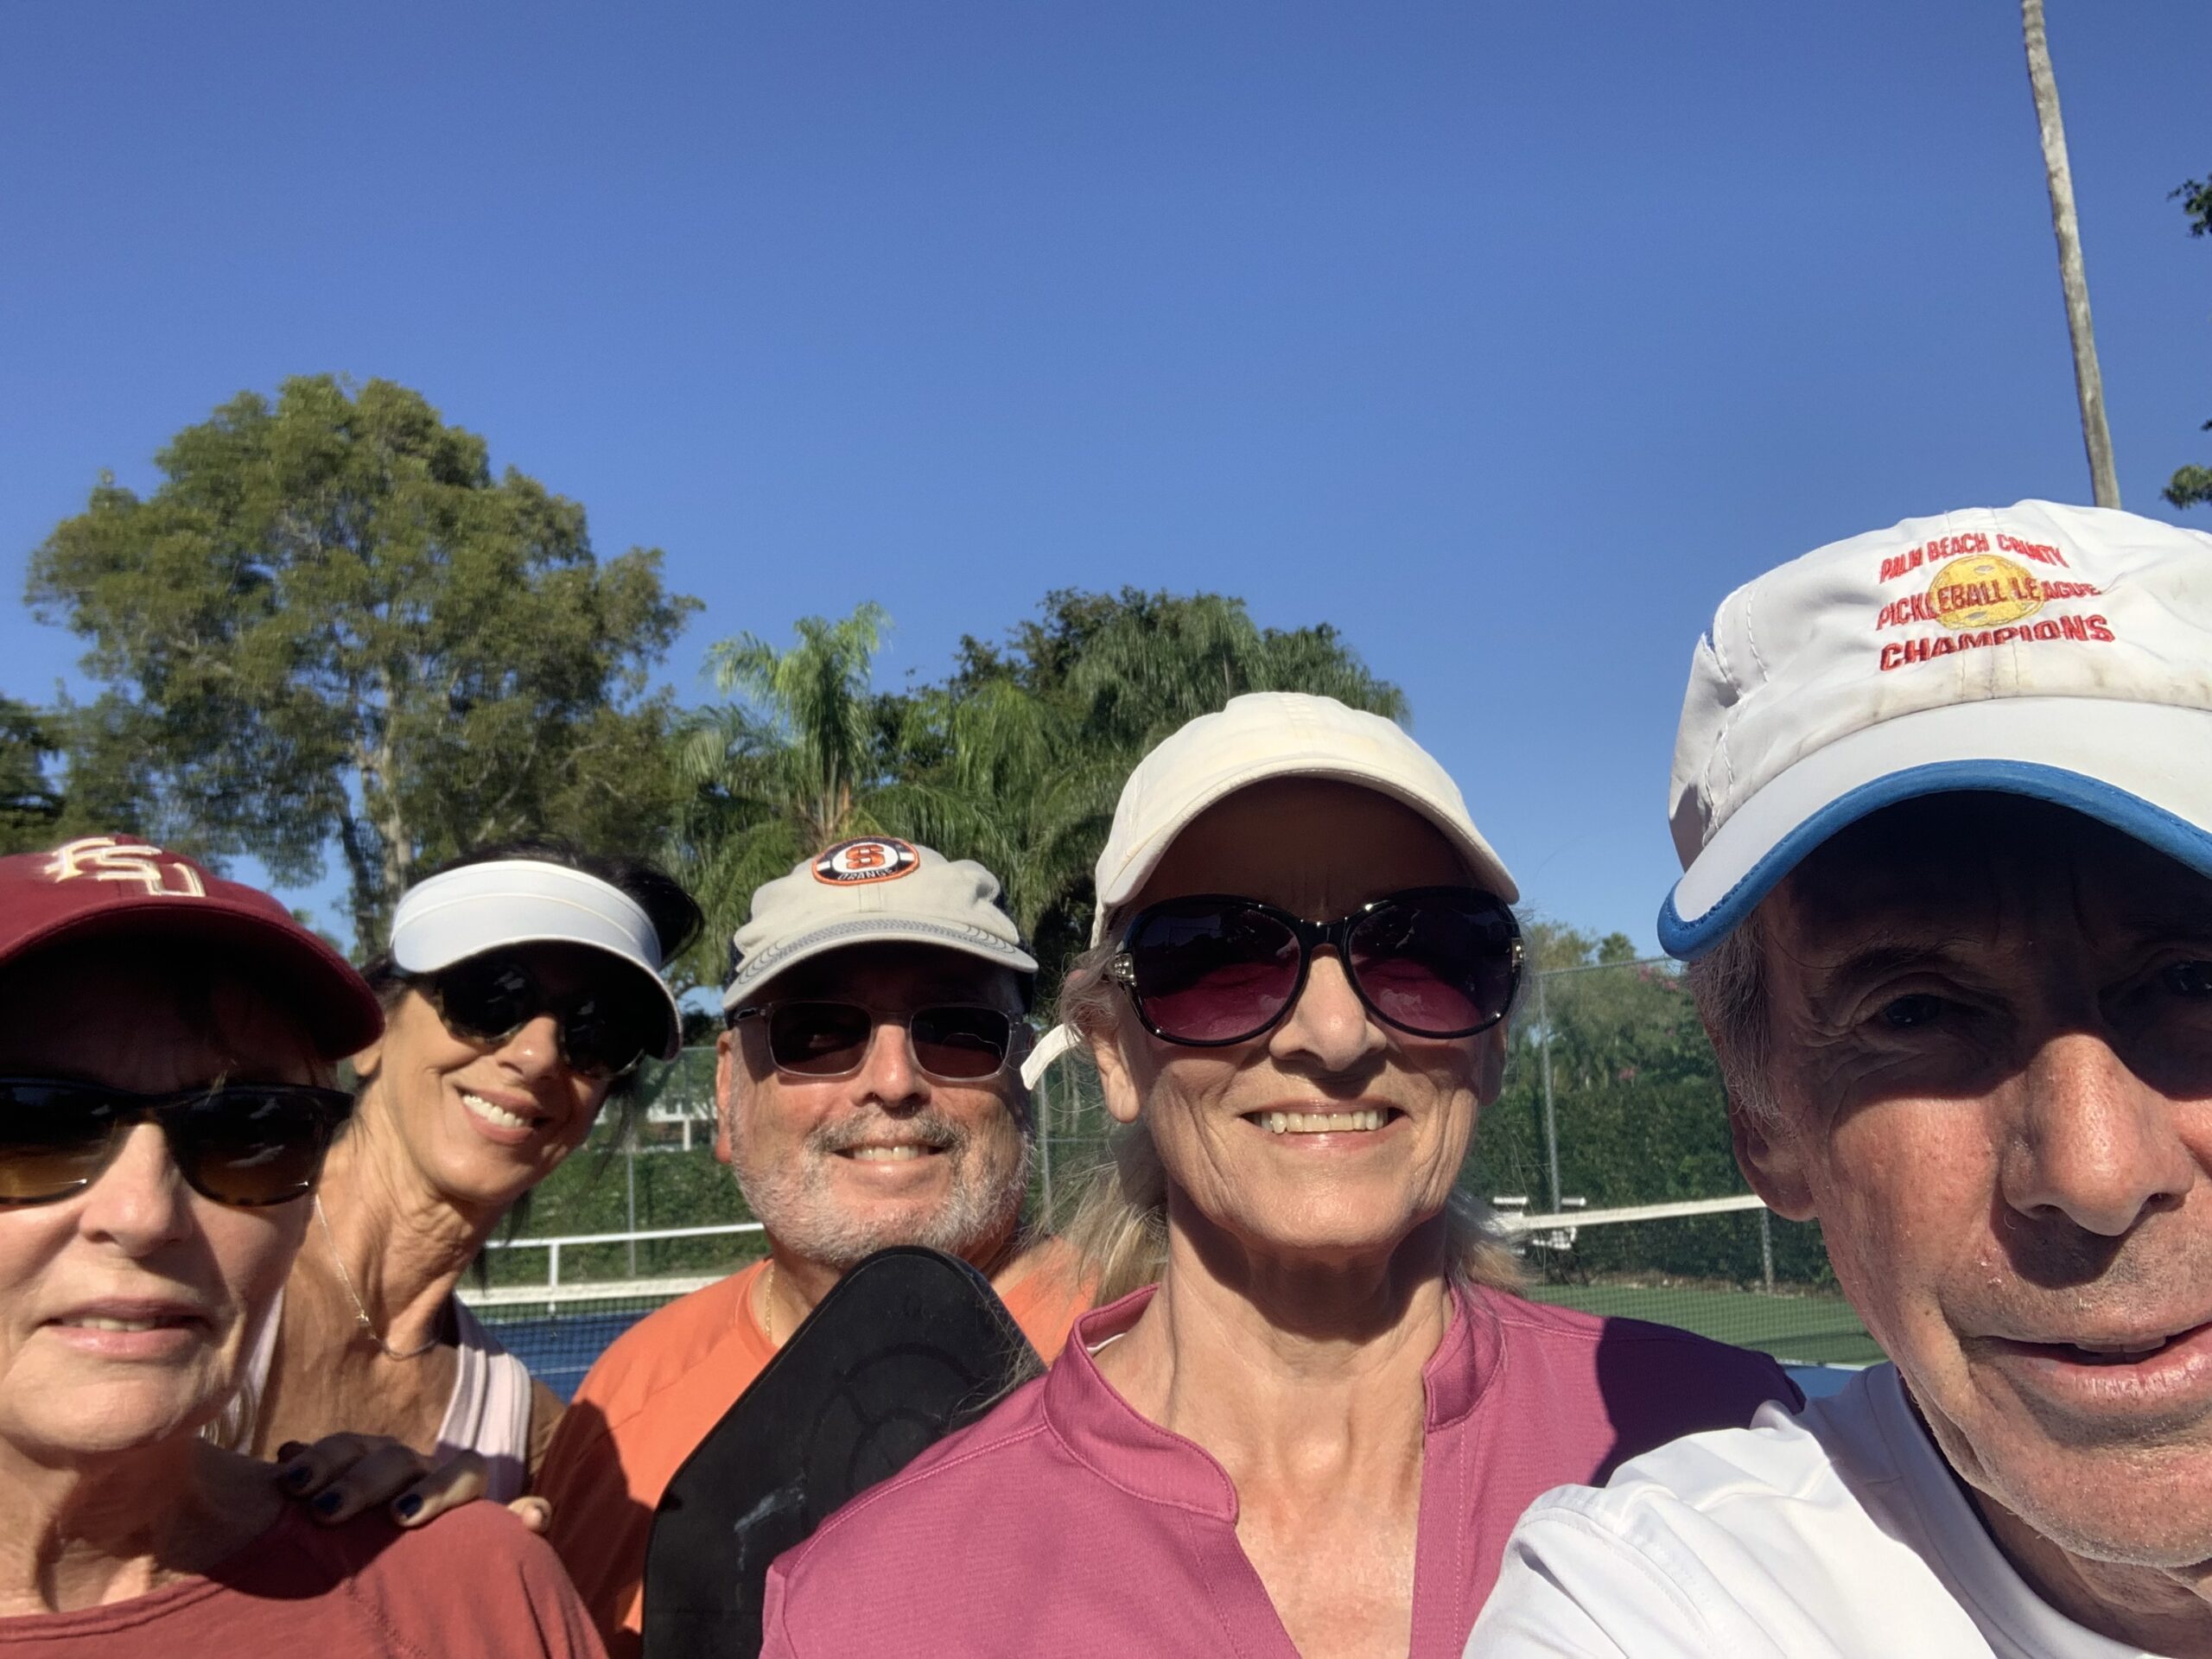 Bob with Randy, Lora, Francine, and Judy after a private pickleball lesson in Delray Beach, Florida